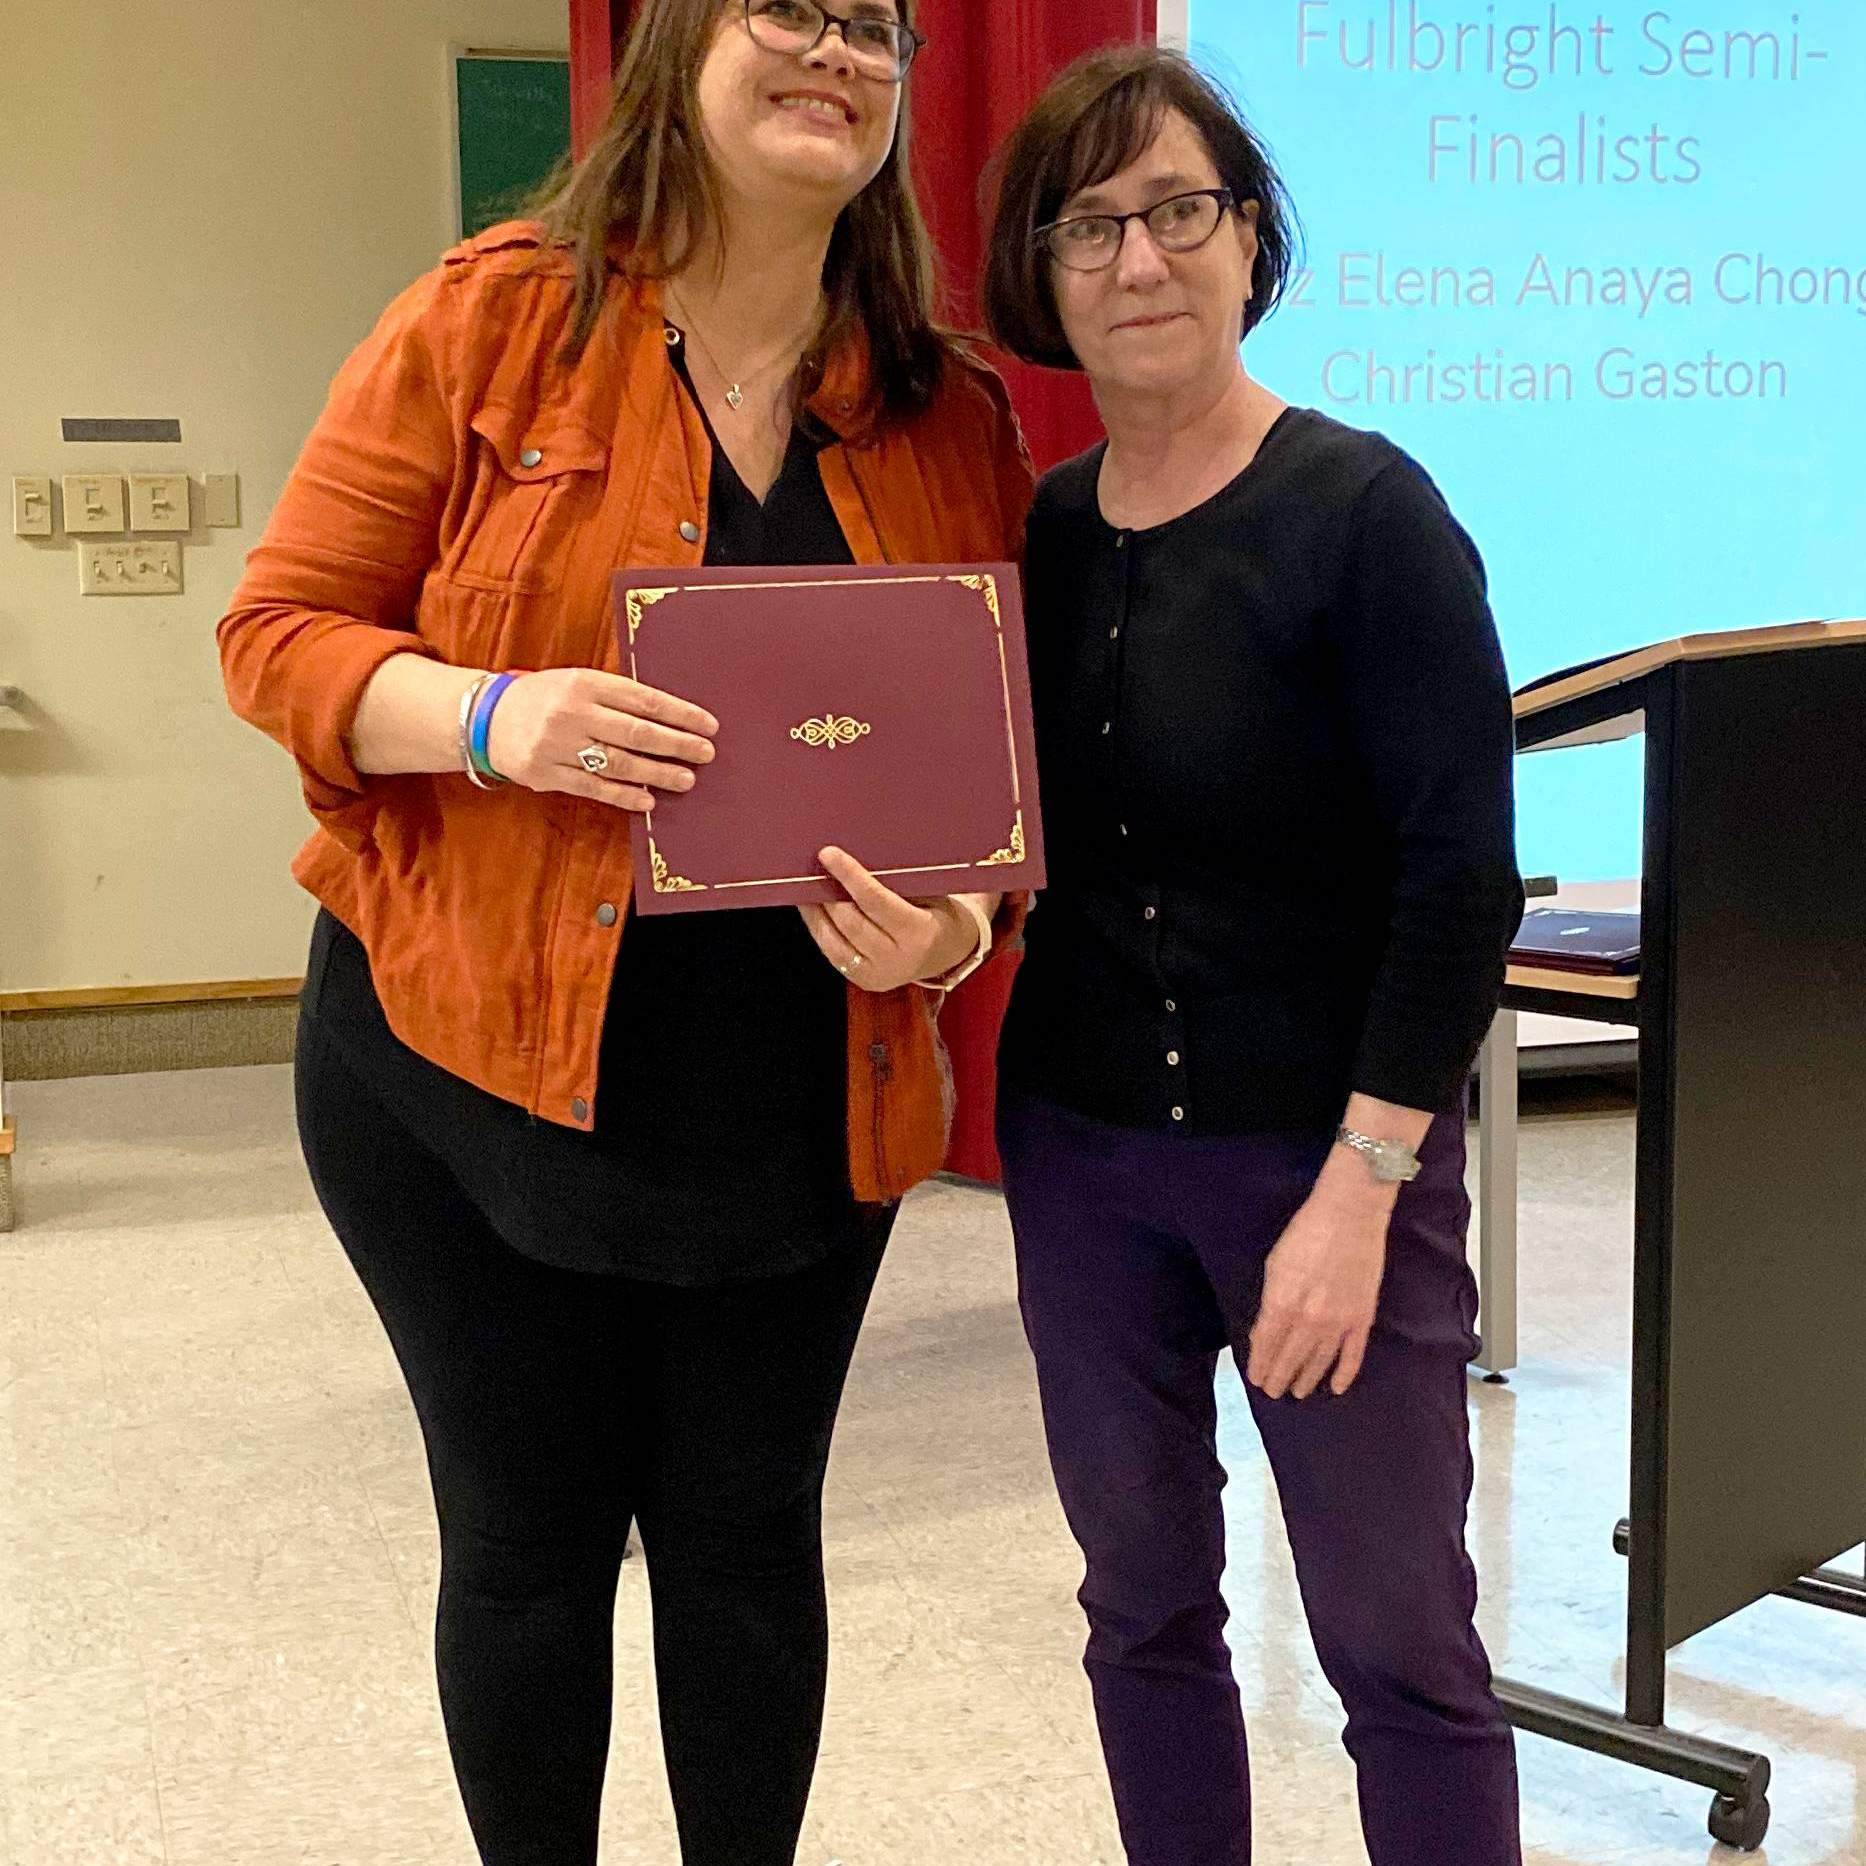 Grad student receives award from department chair